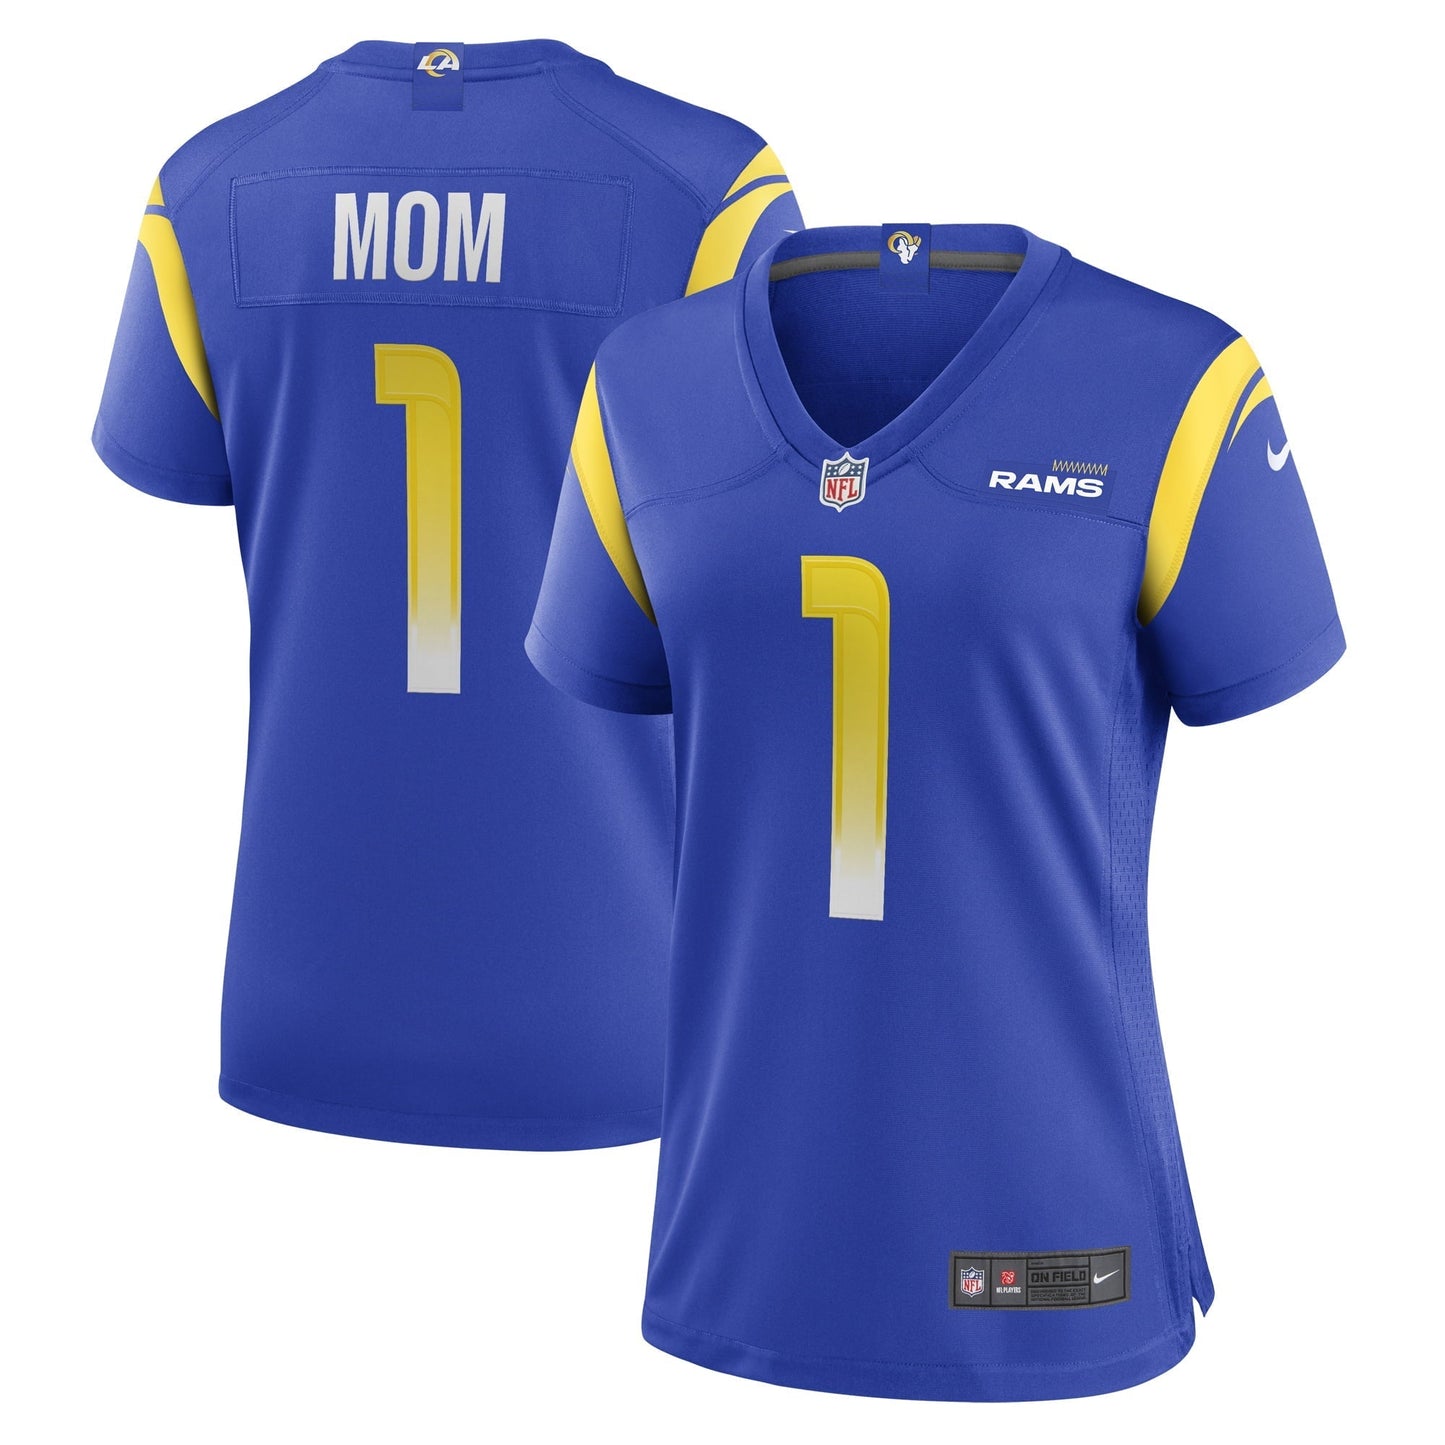 Women's Nike Number 1 Mom Royal Los Angeles Rams Game Jersey